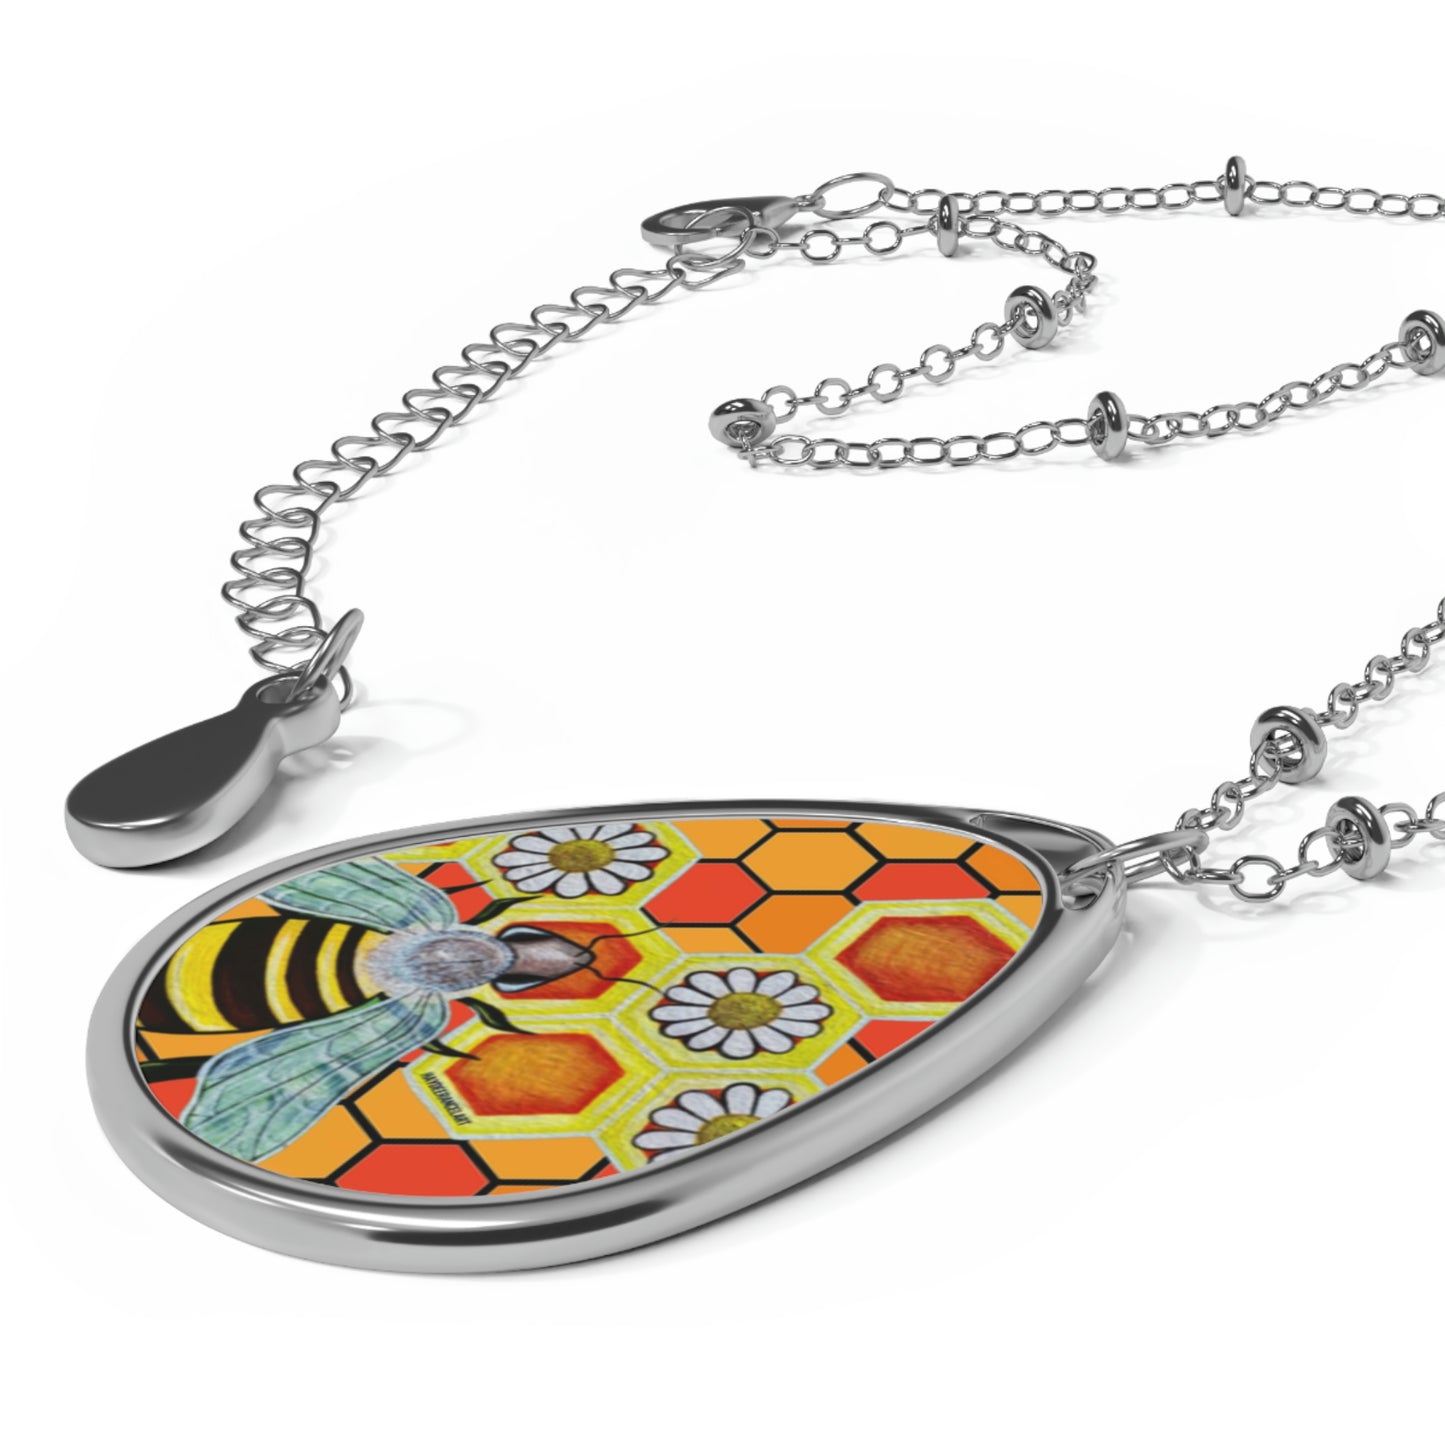 Bees And Daisies Flowers Honeycomb Art Oval Necklace Teardrop Pendant Jewelry